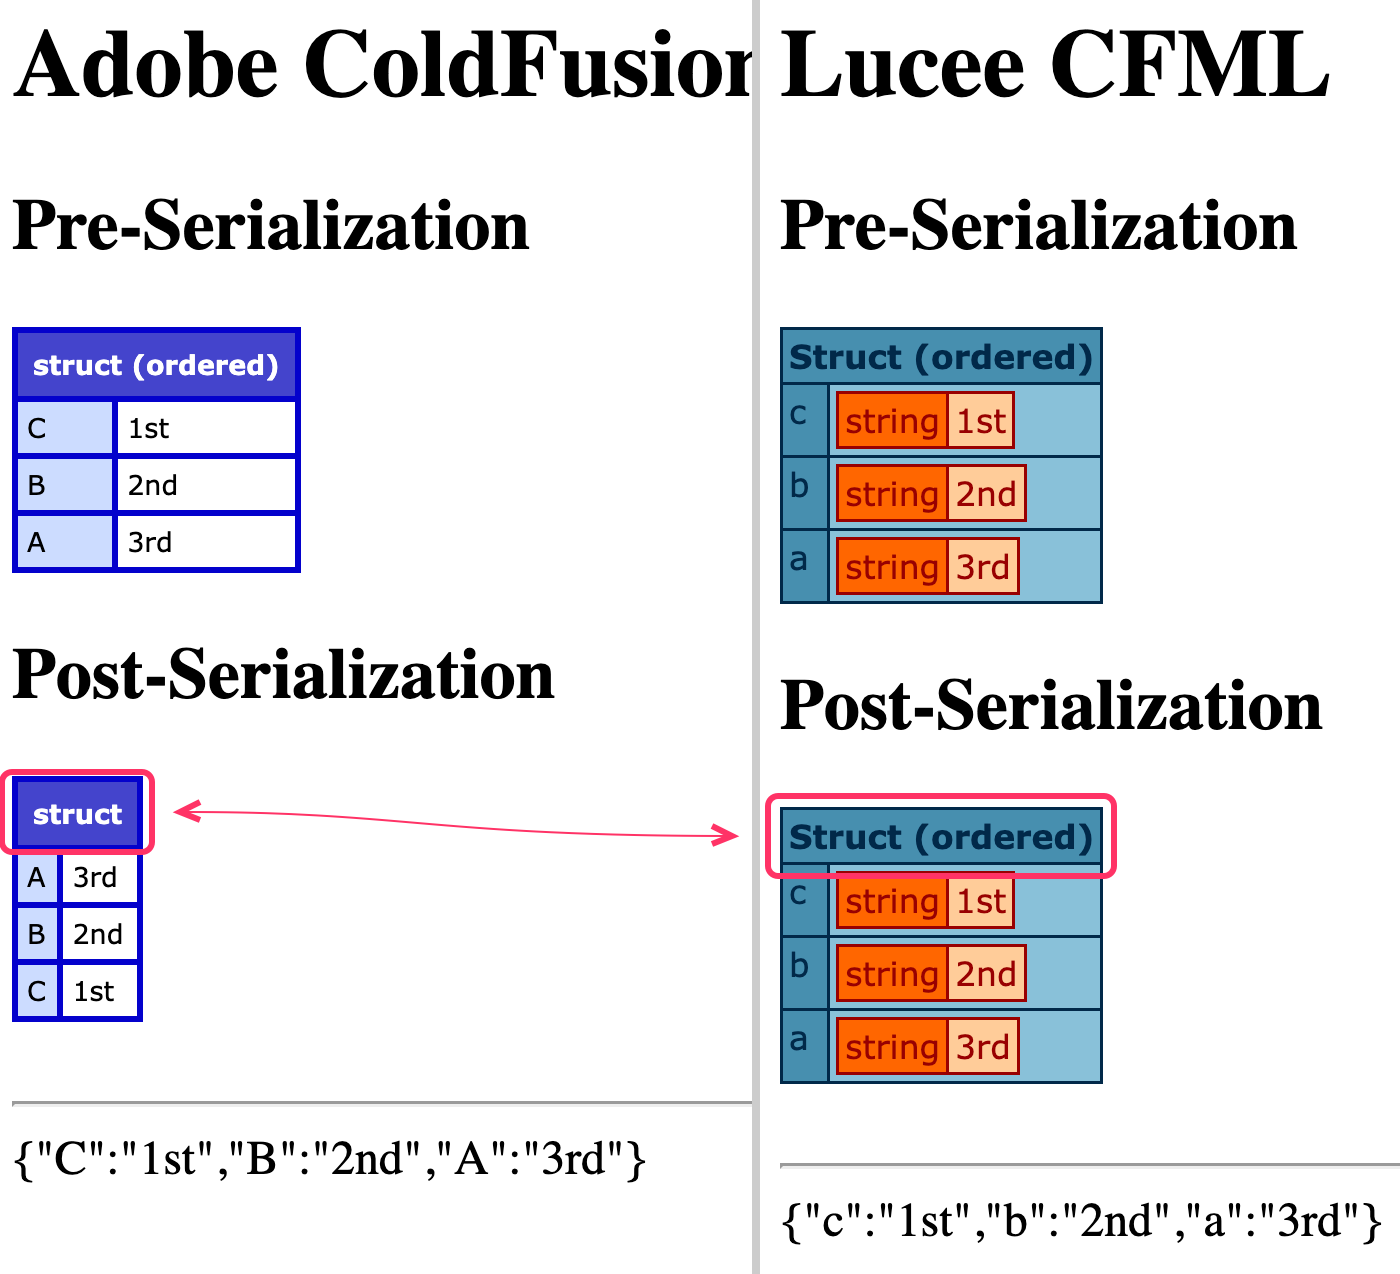 Structs rendered pre and post JSON serialization in Adobe ColdFusion vs. Lucee CFML.